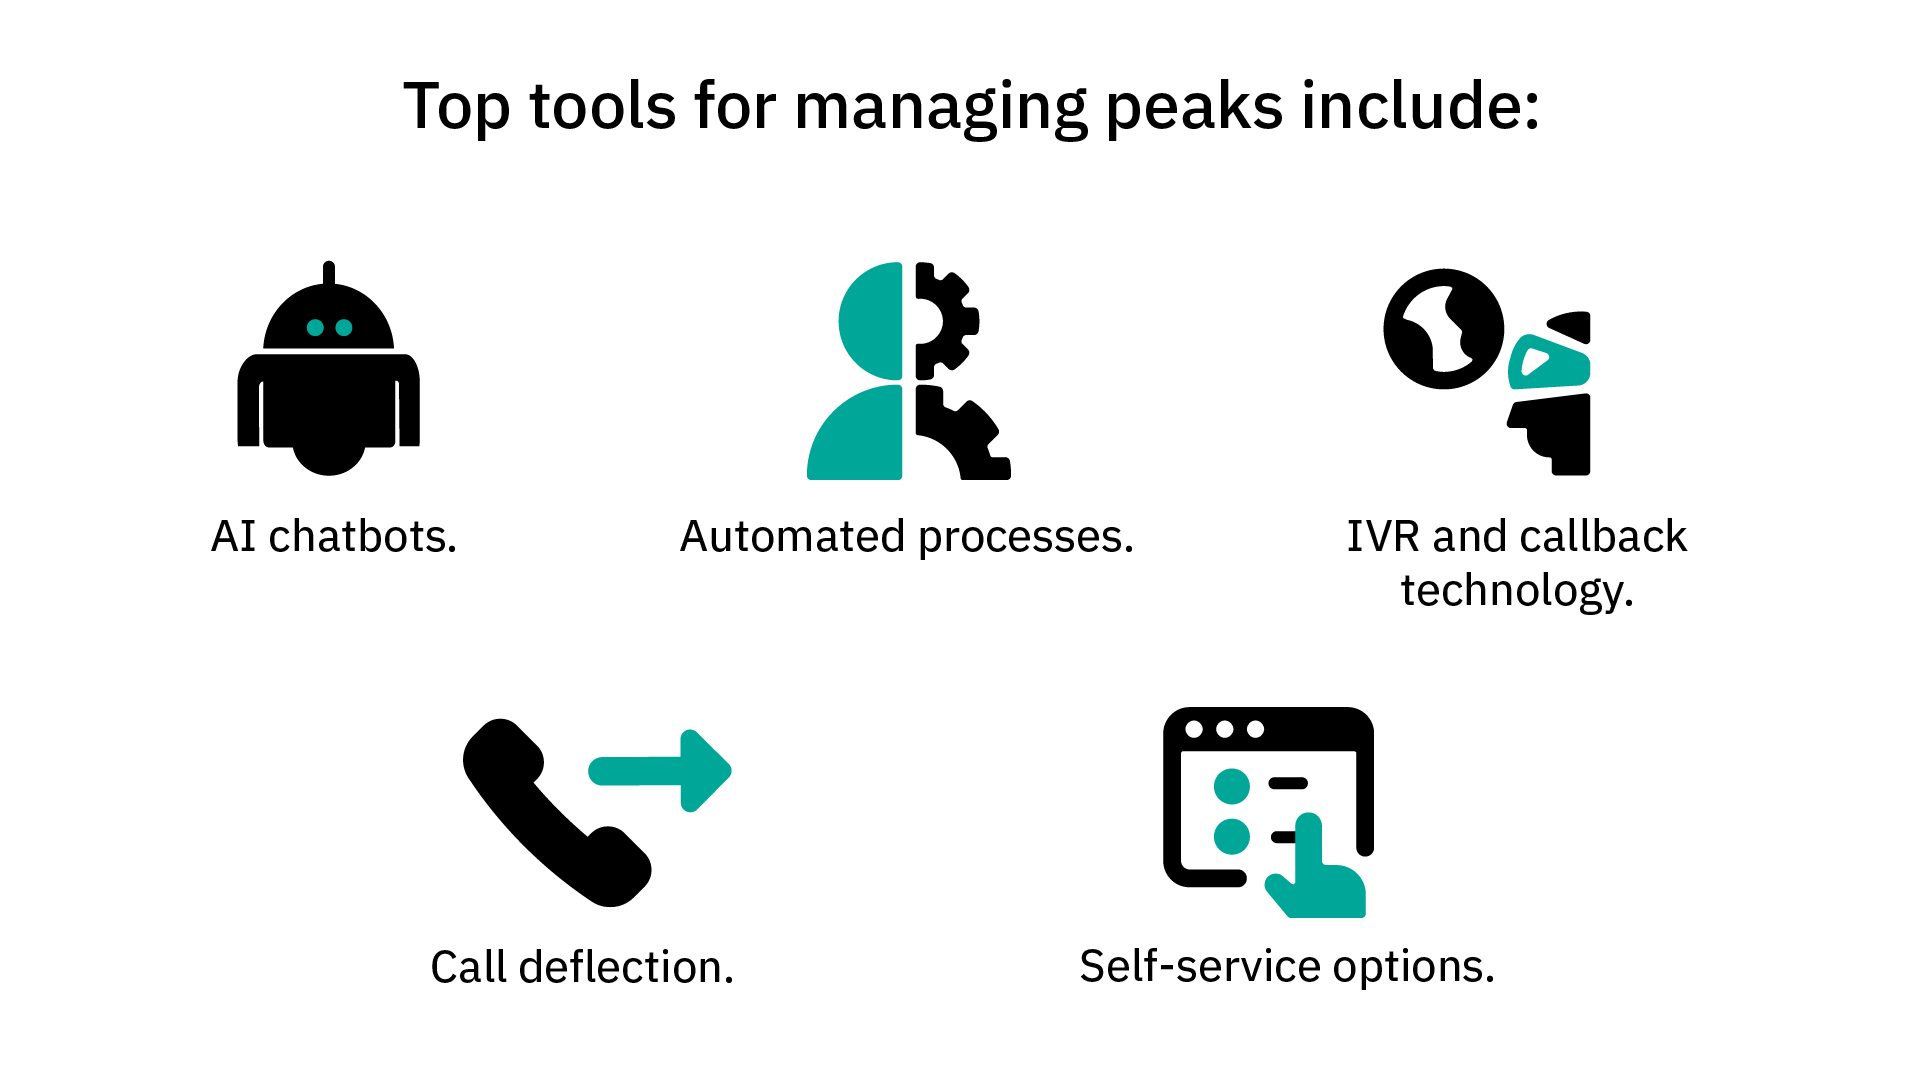 Top tools for managing peaks include: